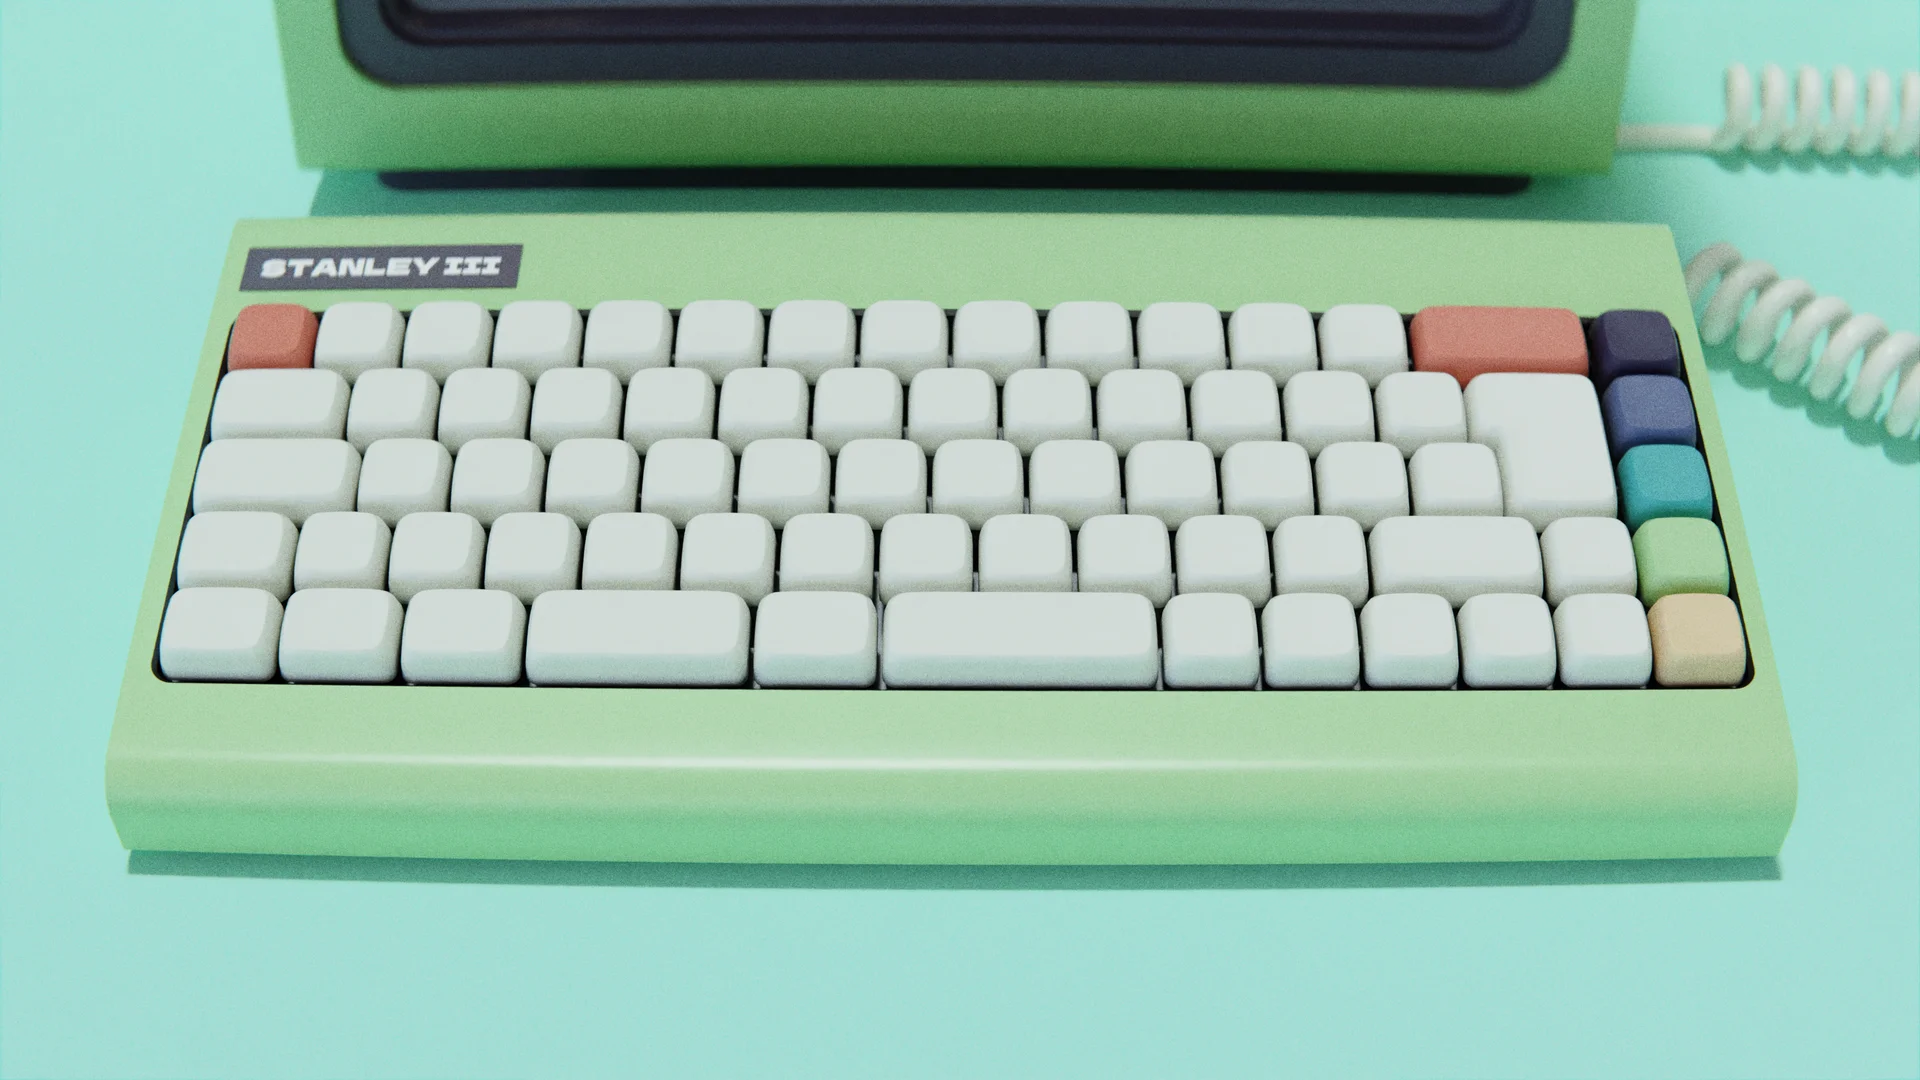 A close-up CGI render of the Stanley's keyboard with its blank keycaps